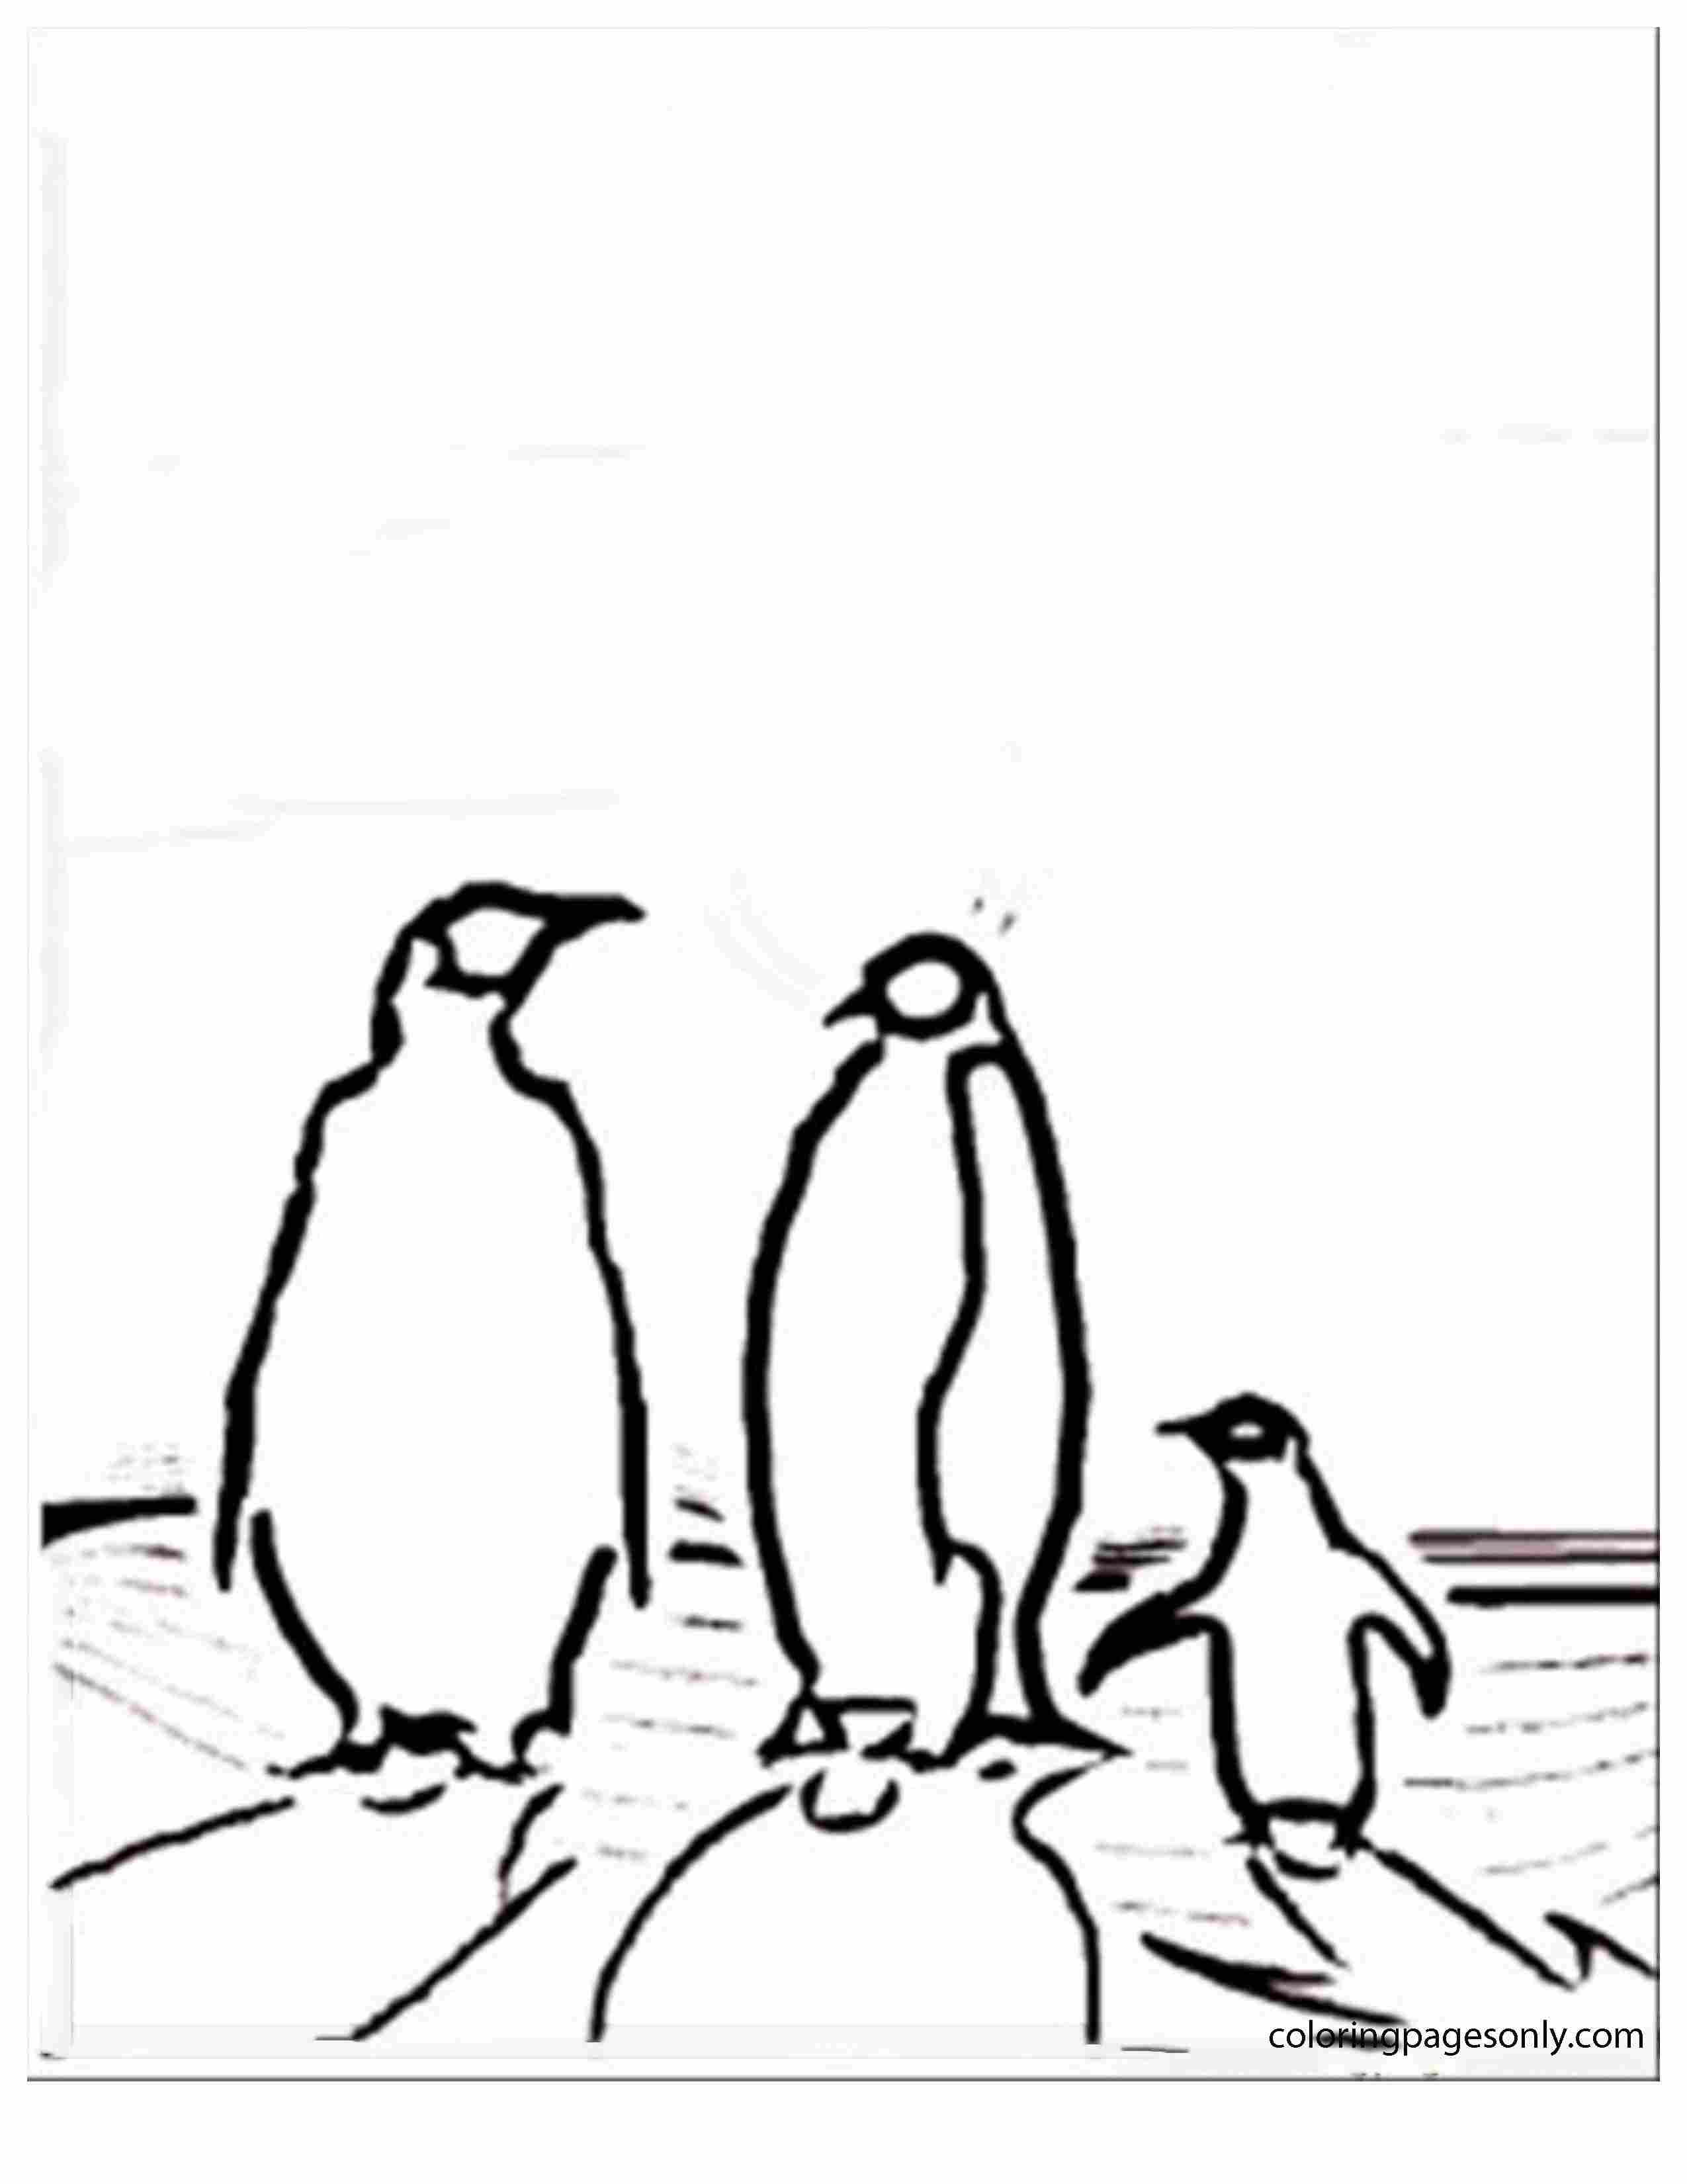 Family of penguins Coloring Page